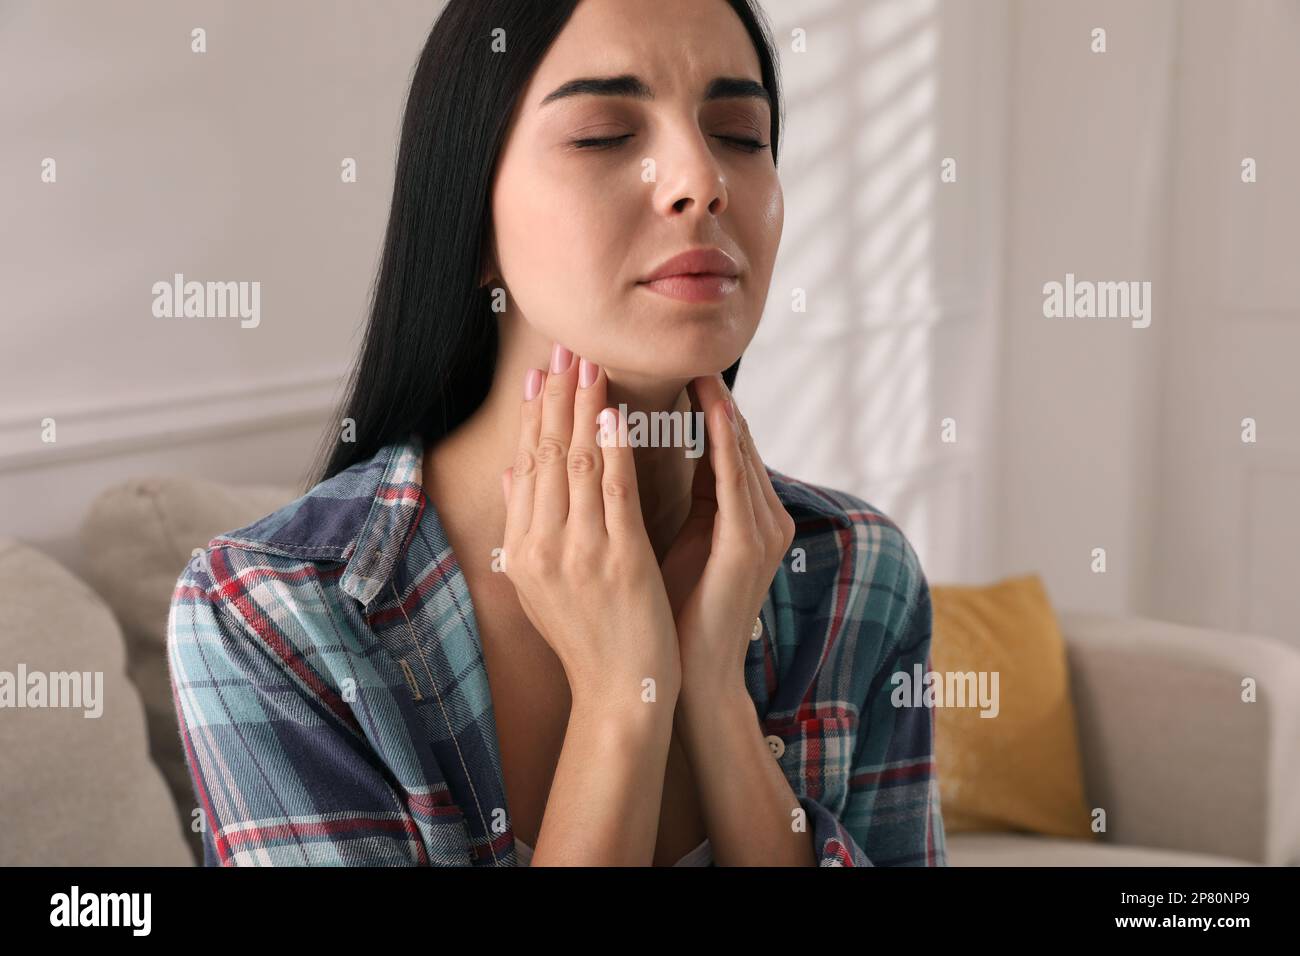 Young woman doing thyroid self examination at home Stock Photo